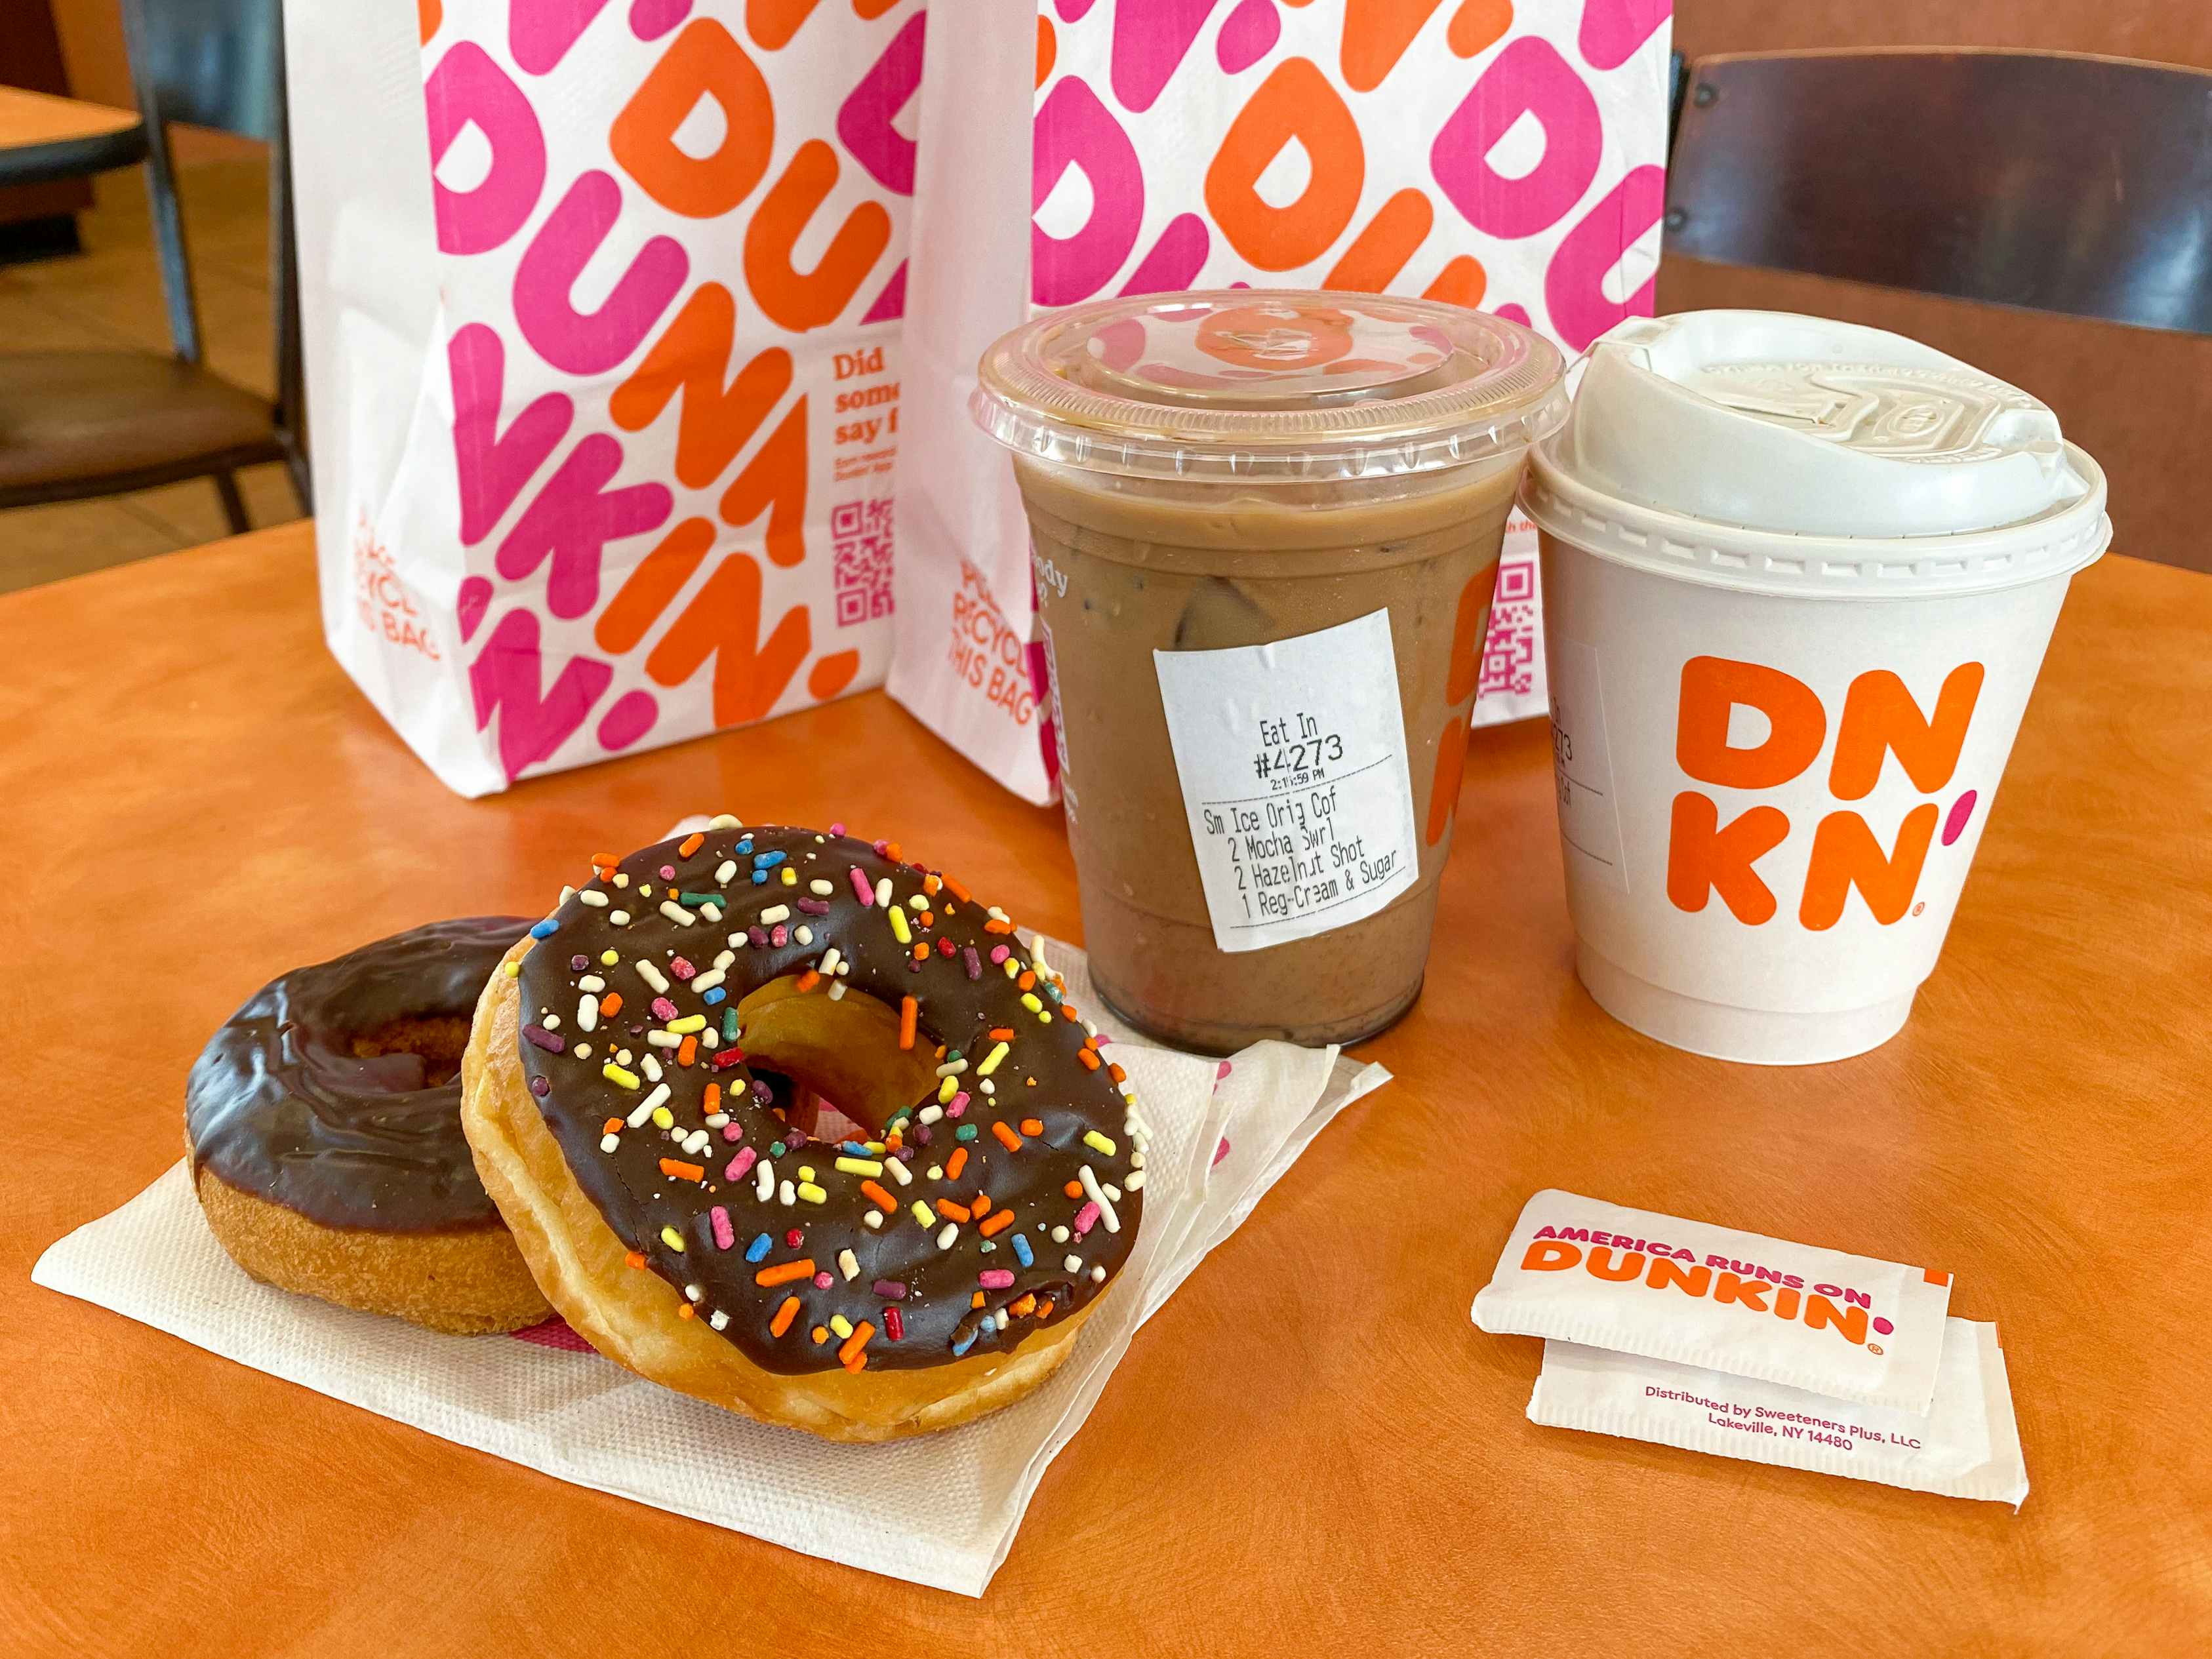 Two donuts on a napkin, some sugar packets, two coffees, and two Dunkin bags sitting on a table inside Dunkin.